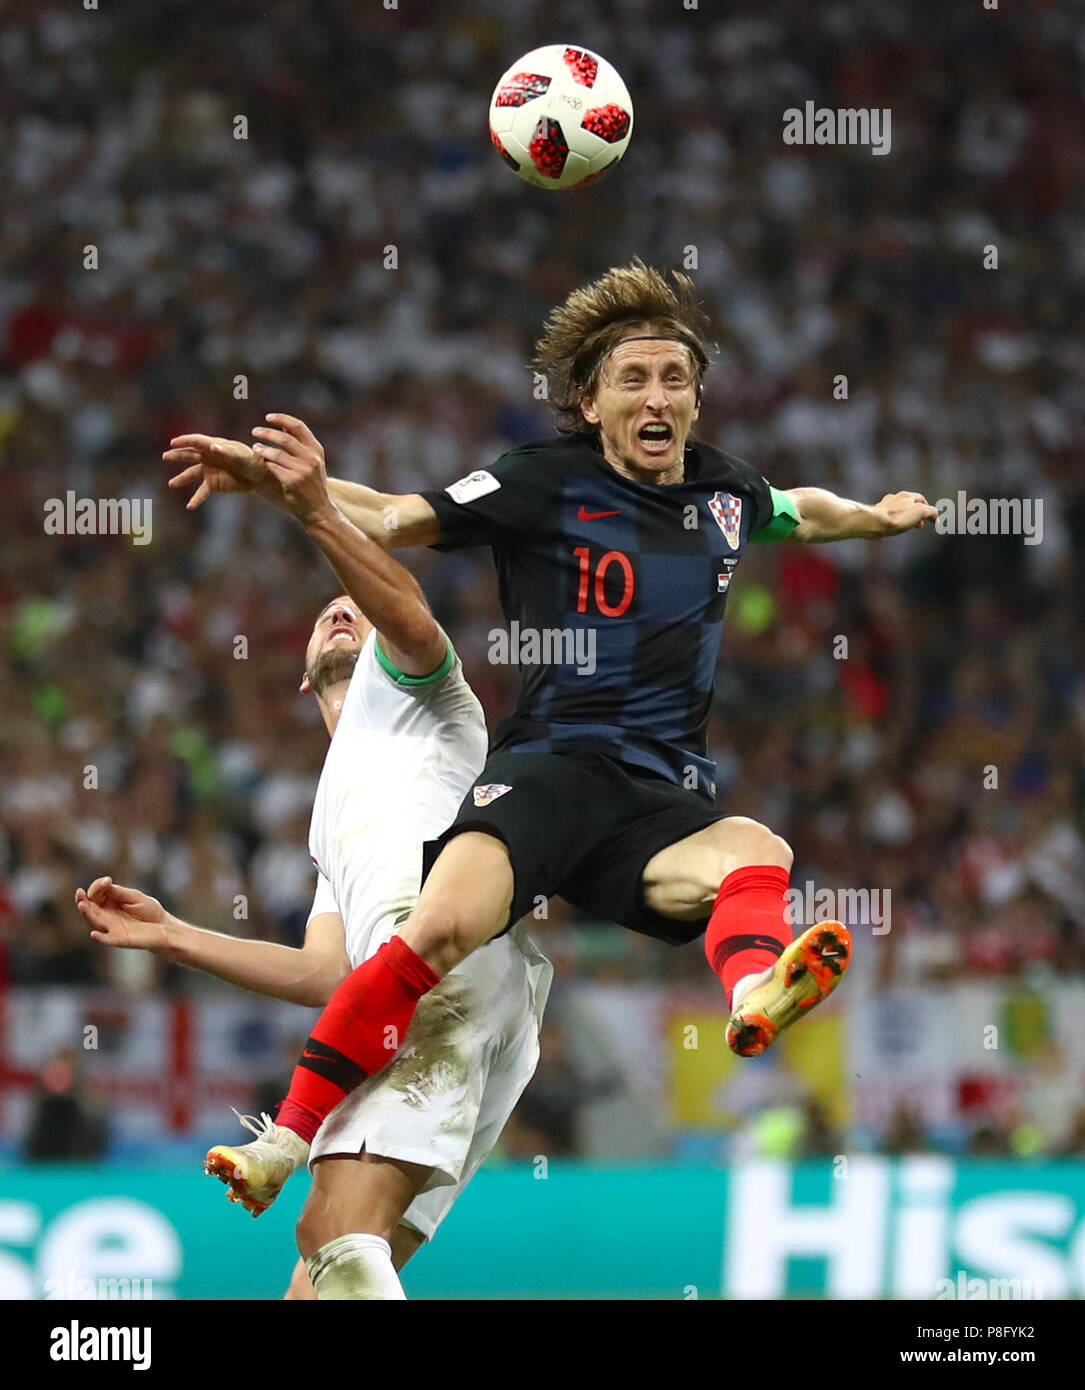 England's Harry Kane (left) and Croatia's Luka Modric battle for the ball during the FIFA World Cup, Semi Final match at the Luzhniki Stadium, Moscow. PRESS ASSOCIATION Photo. Picture date: Wednesday July 11, 2018. See PA story WORLDCUP Croatia. Photo credit should read: Tim Goode/PA Wire. Stock Photo